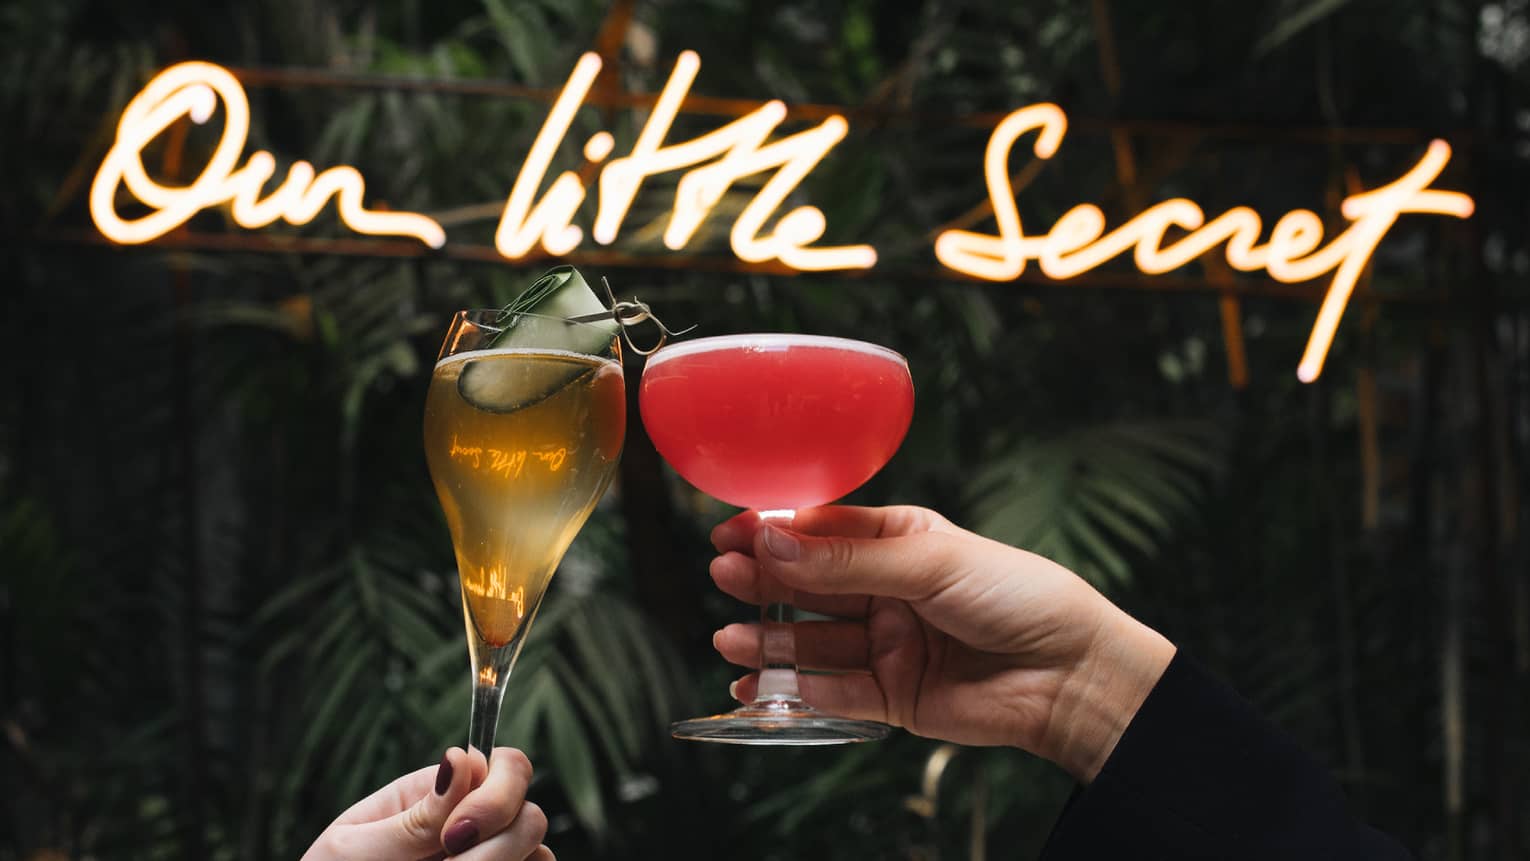 Two people toasting in front of a sign that says "our little secret."